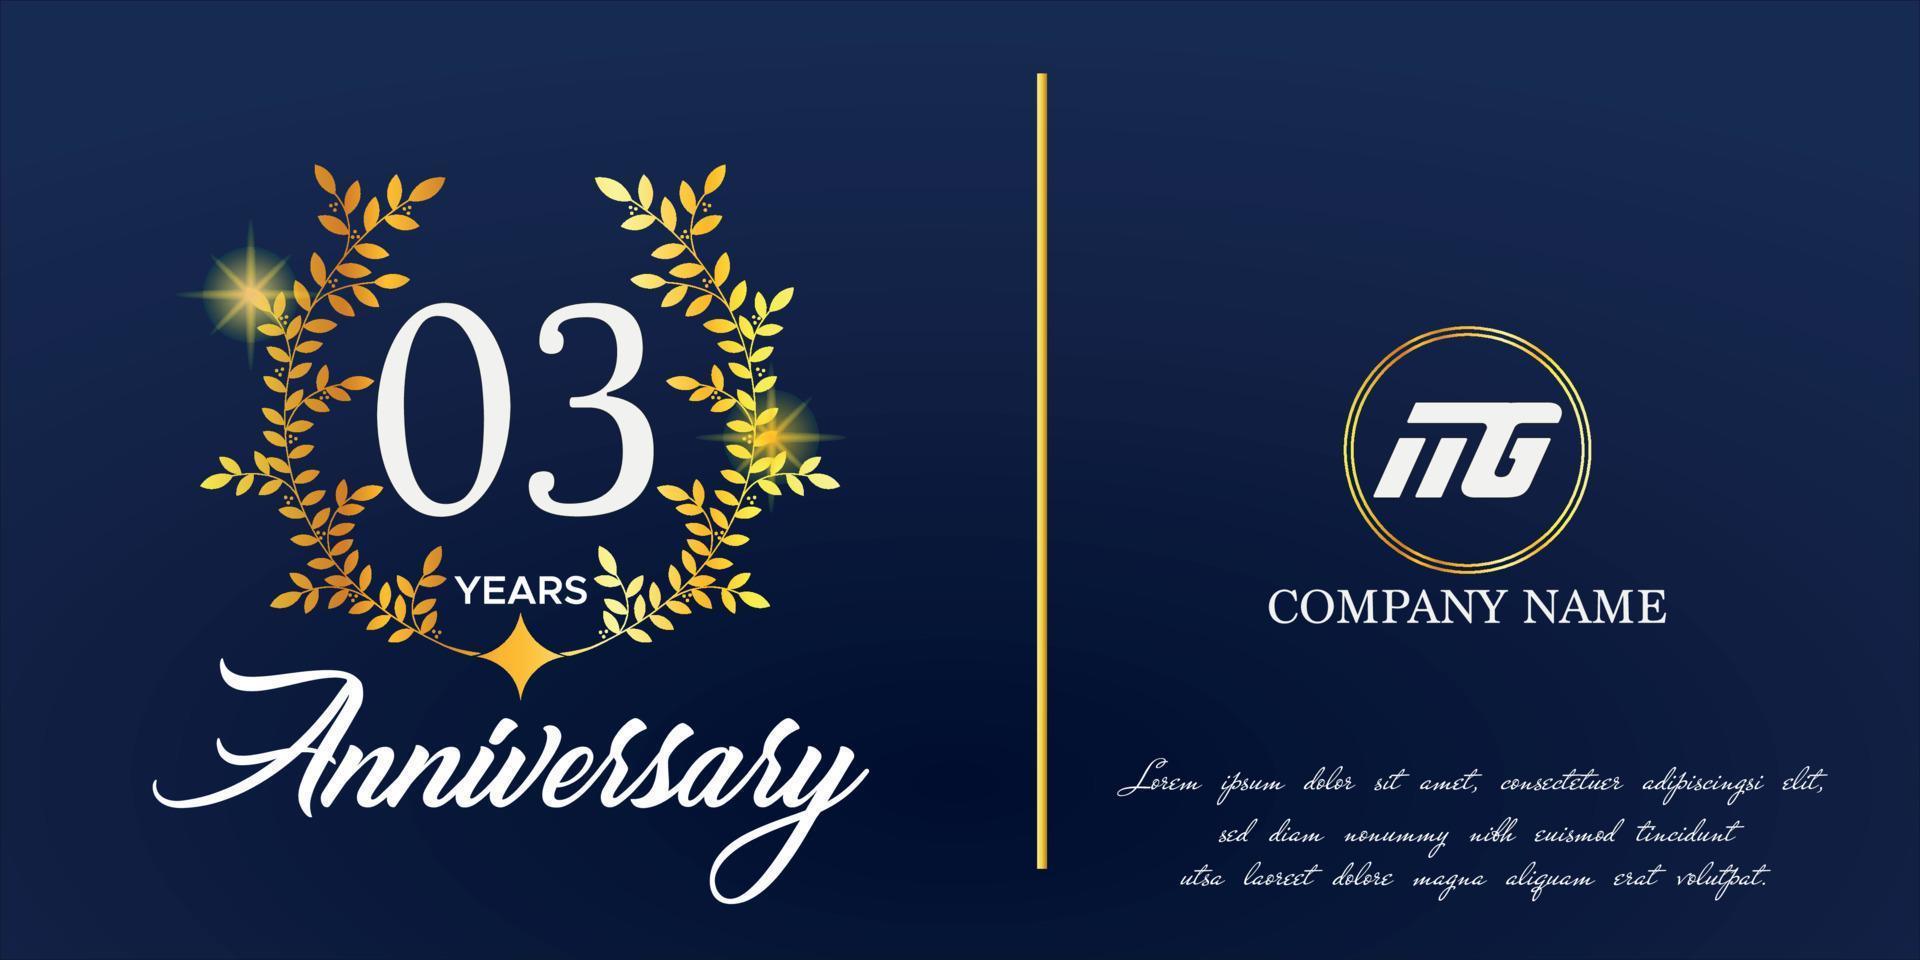 03rd anniversary logo with elegant ornament monogram and logo name template on elegant blue background, sparkle, vector design for greeting card.